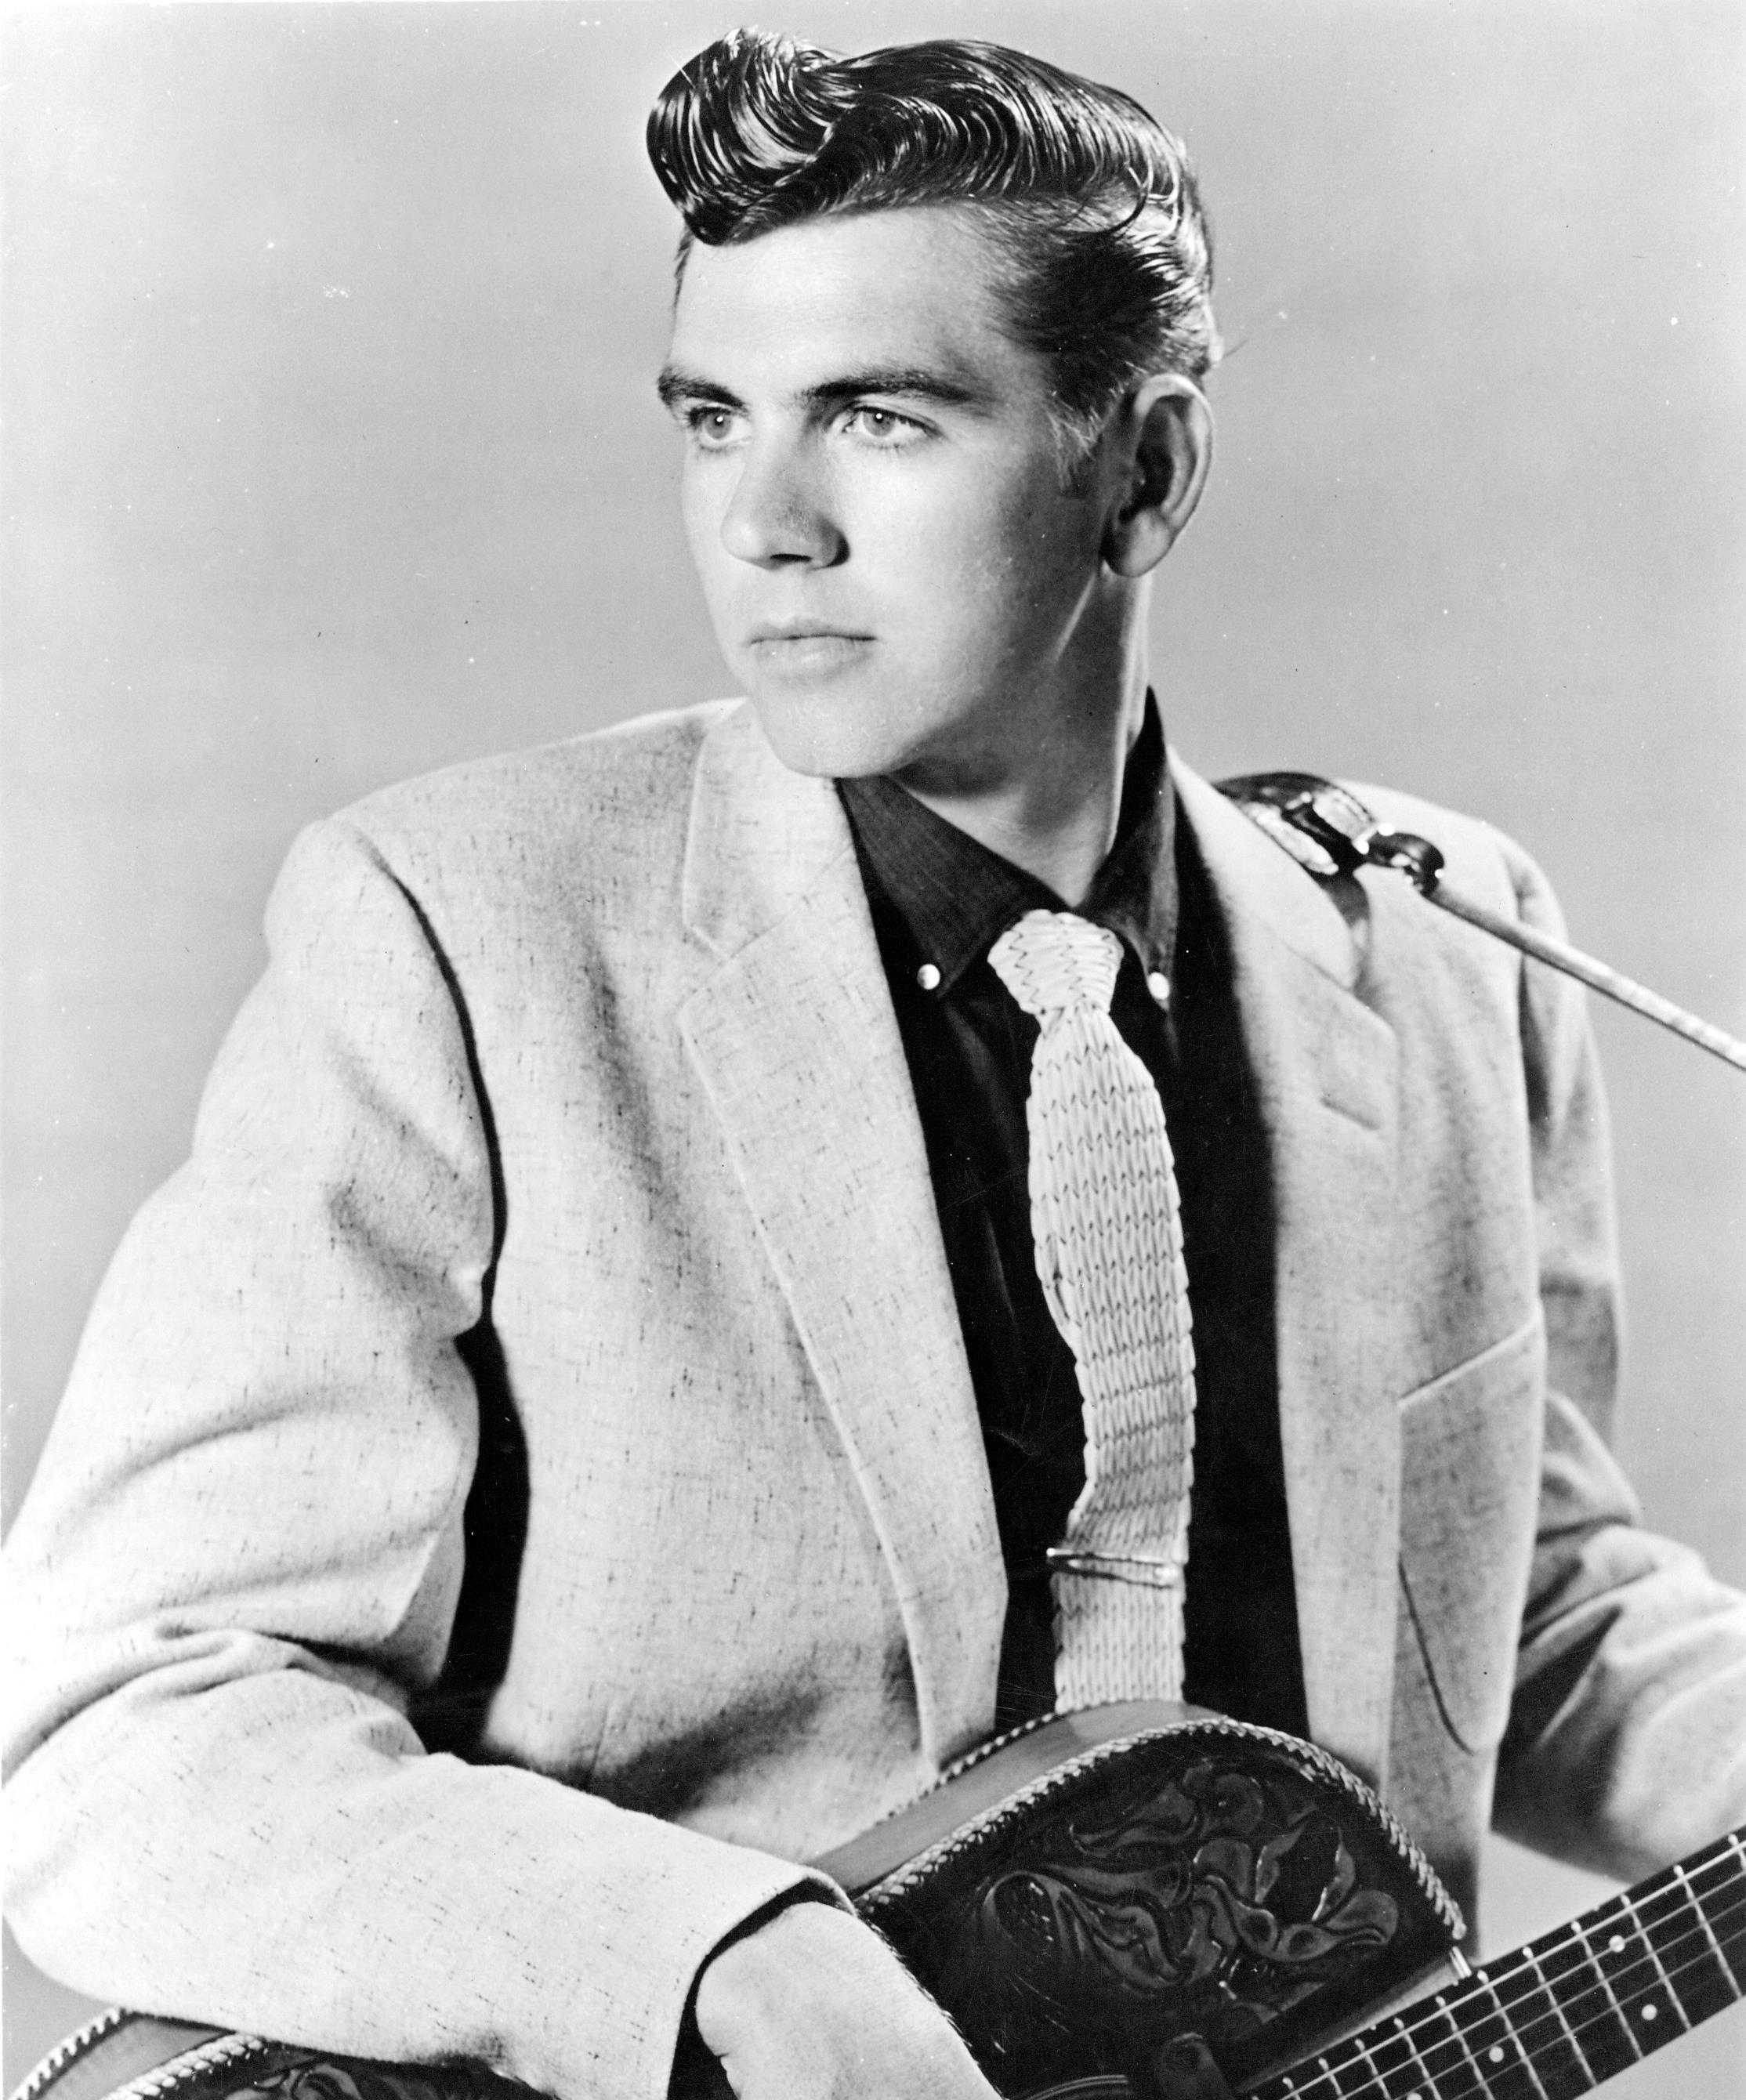 <p>Sanford Clark -- the rockabilly-country music star whose 1956 Top 10 hit "The Fool" was re-recorded by Elvis Presley and The Animals -- is dead following a battle with the coronavirus. On July 4, 2021, he passed away at Mercy Hospital in Joplin, Missouri, where he was receiving cancer treatment before being diagnosed with COVID-19, publicist and fellow performer Johnny Vallis told Billboard. Sanford was 85.</p>